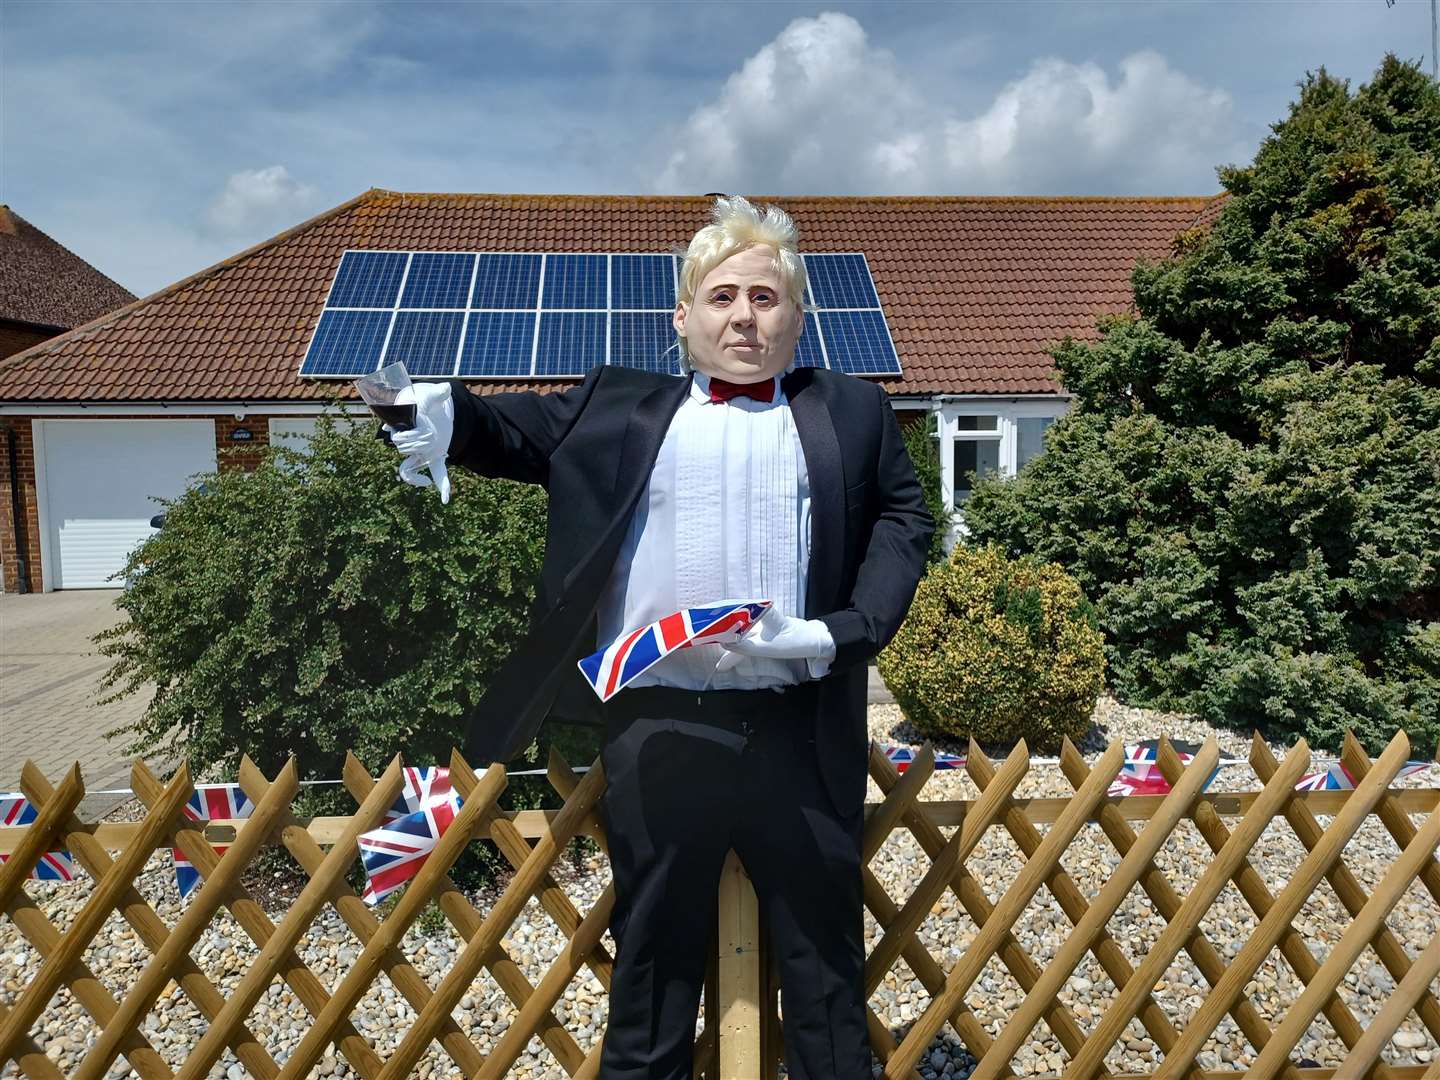 A Boris Johnson scarecrow on West Hythe Road, West Hythe, for the Queen's Platinum Jubilee